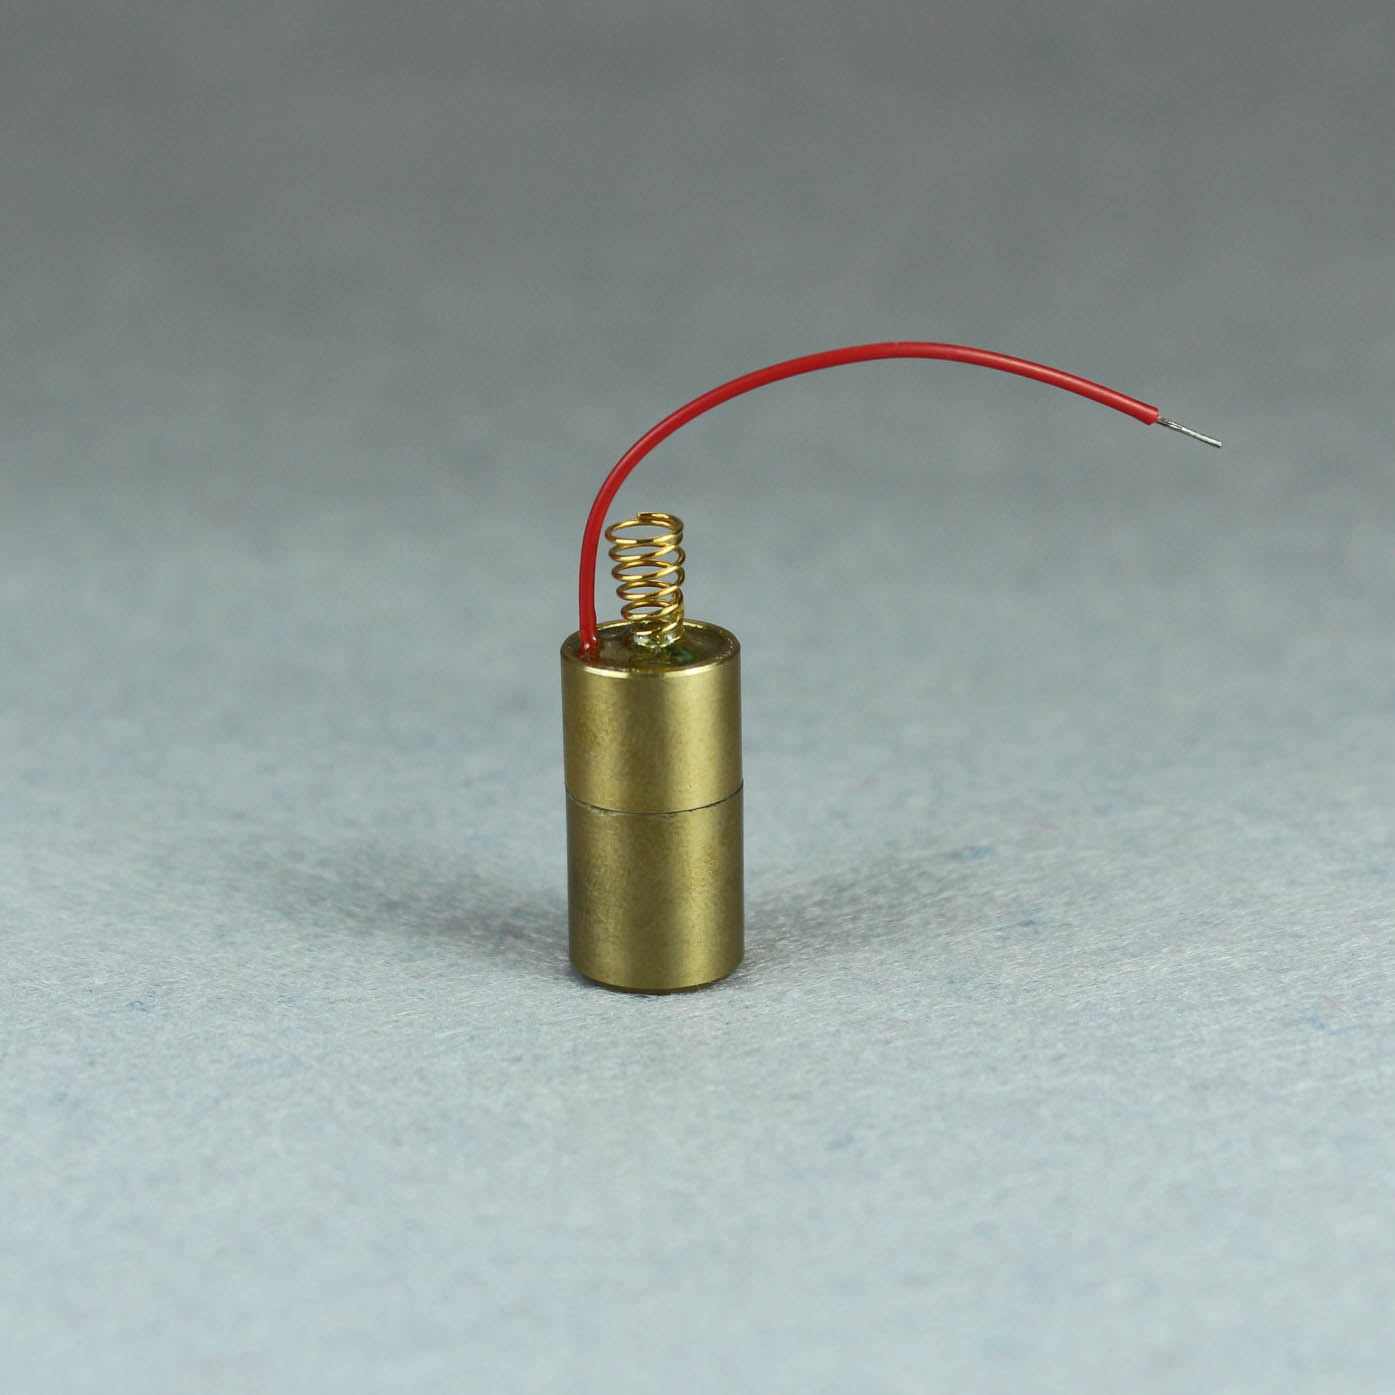 Military Laser 650nm 5mW Pulsed Laser Diode Module with PD Feedback and Spring Connection